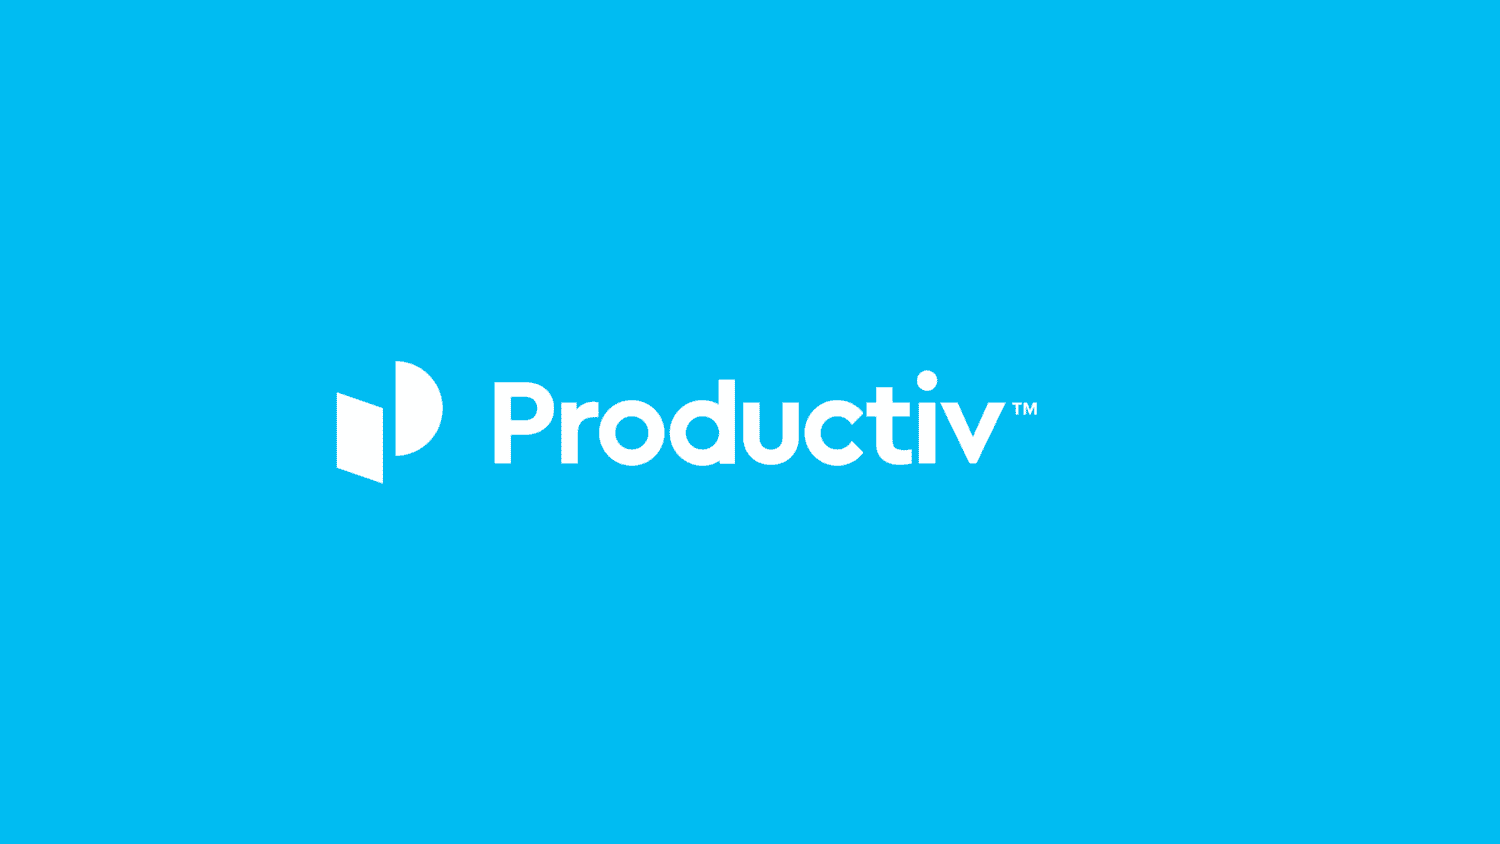 Productiv Closes Fiscal Year With Strong Momentum